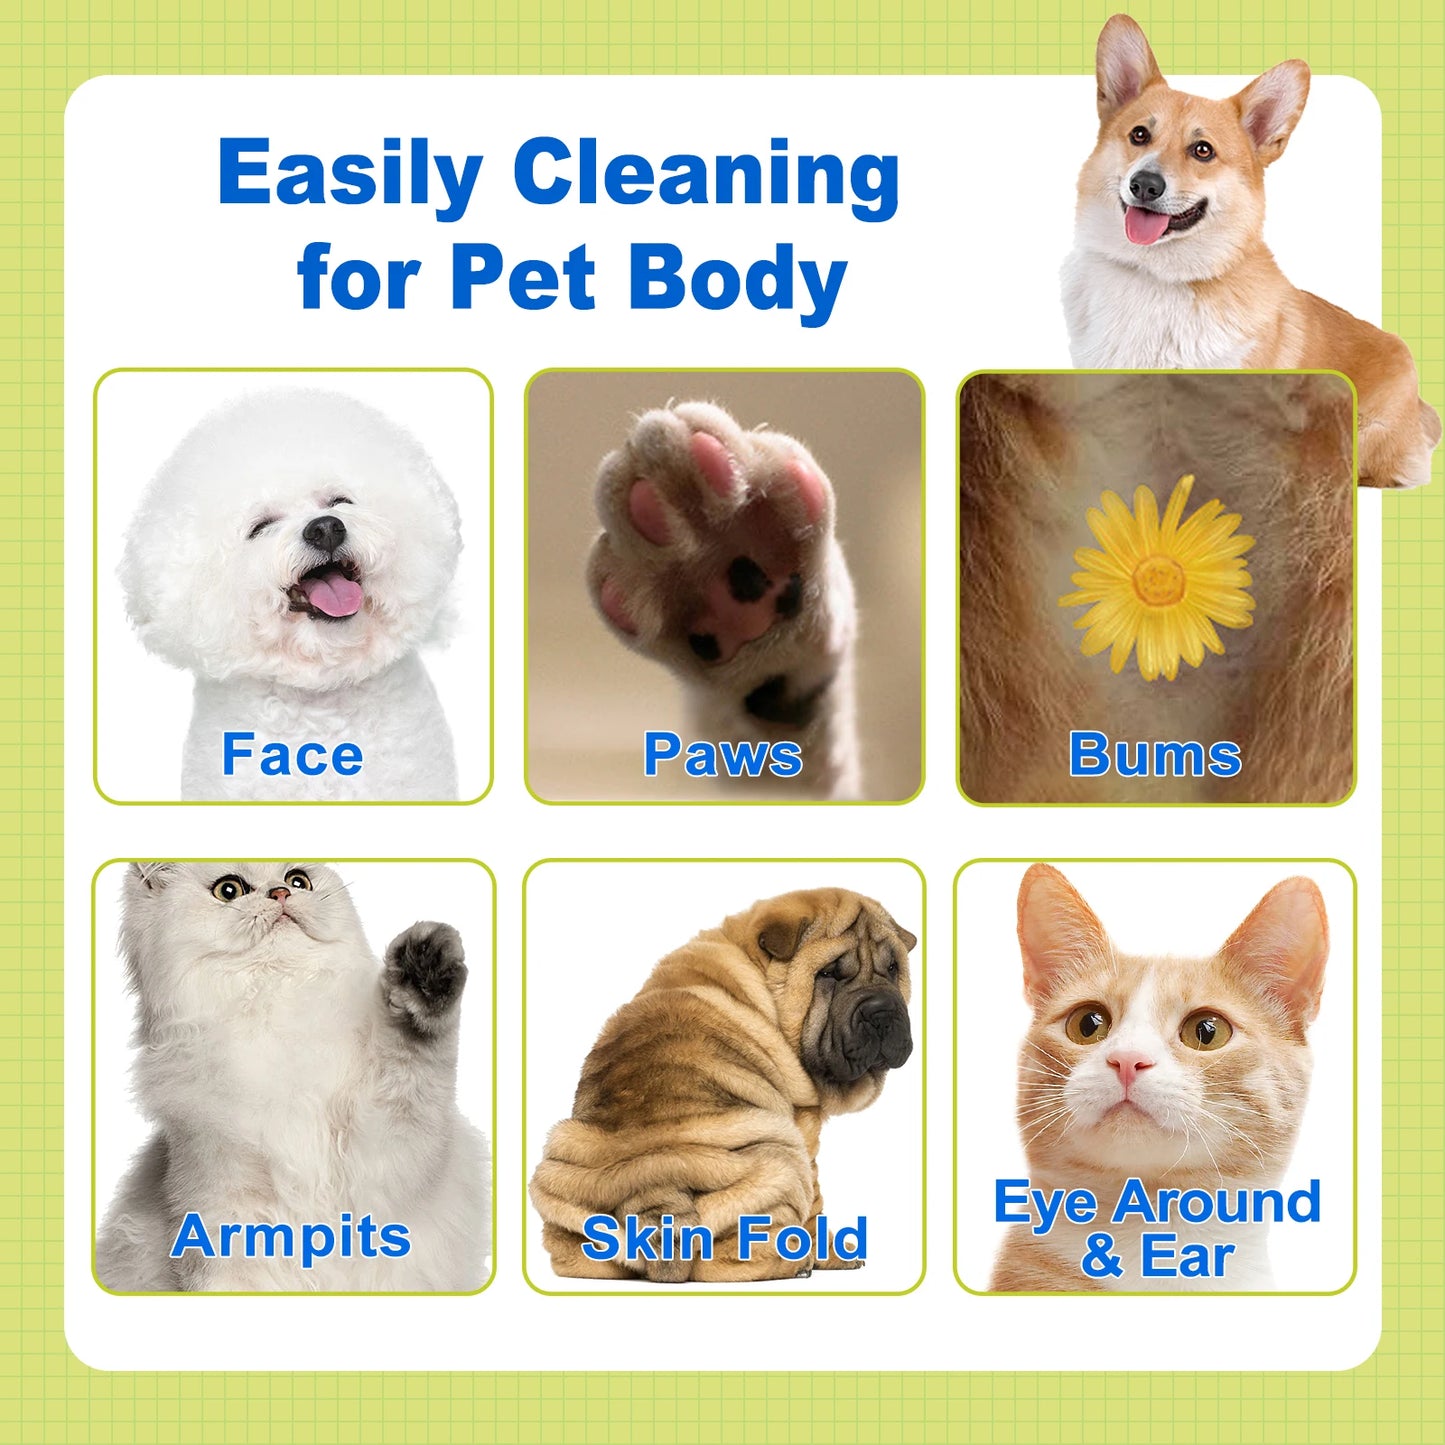 100Ct Doctor Easy All Purpose Pet Grooming Wipes Safety Plant Based Ingredients for Dogs & Cats Paws Body Nose Bum Cleaning